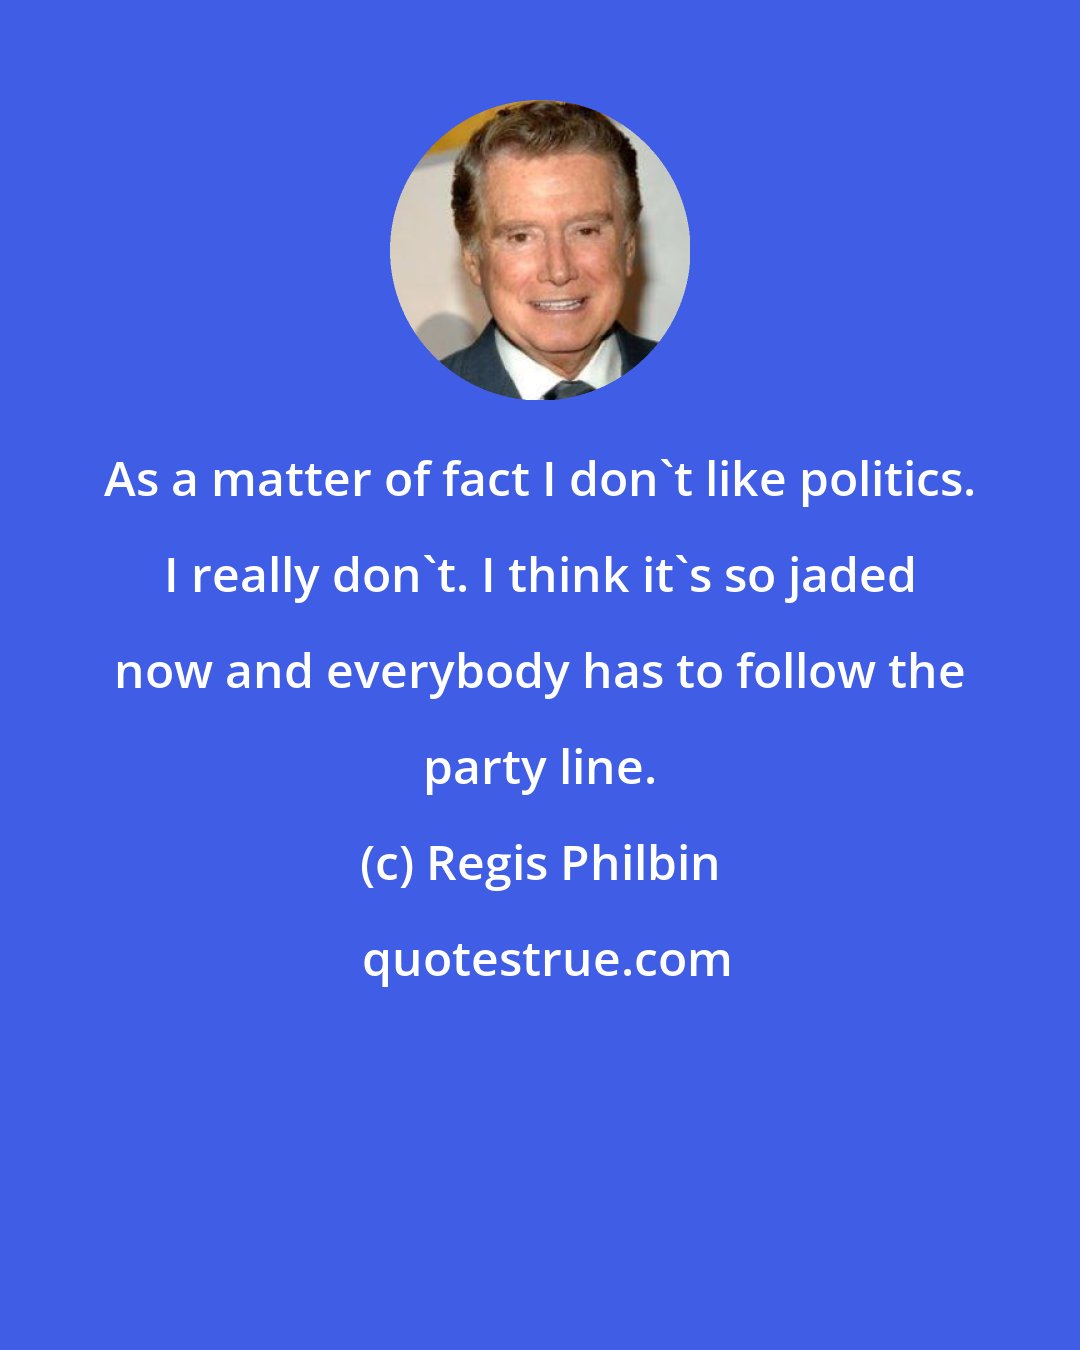 Regis Philbin: As a matter of fact I don't like politics. I really don't. I think it's so jaded now and everybody has to follow the party line.